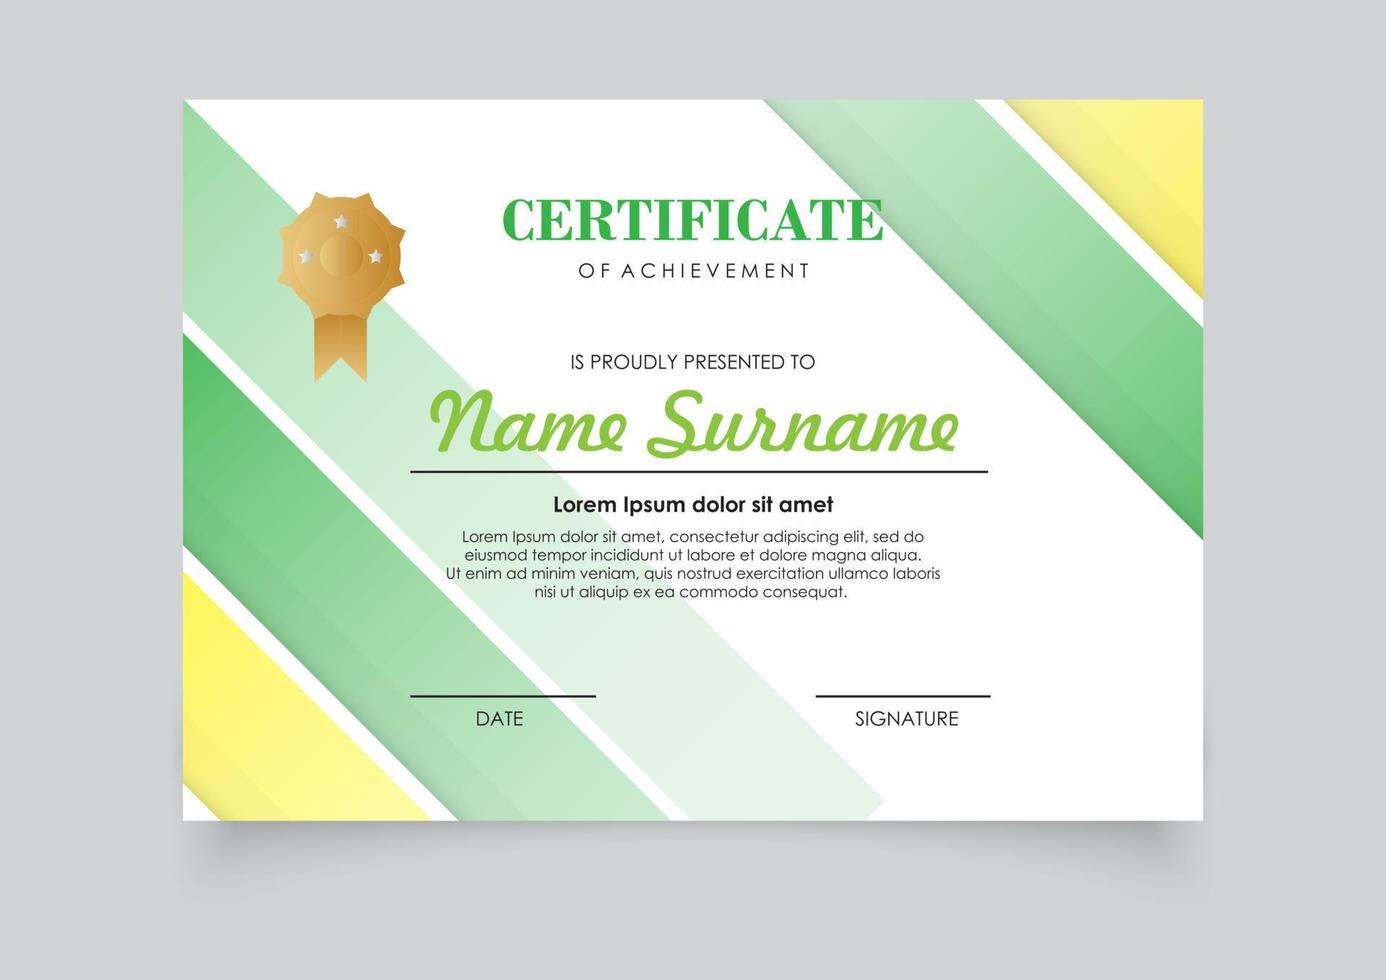 Modern certificate template gradients color design. Easy for print. vector